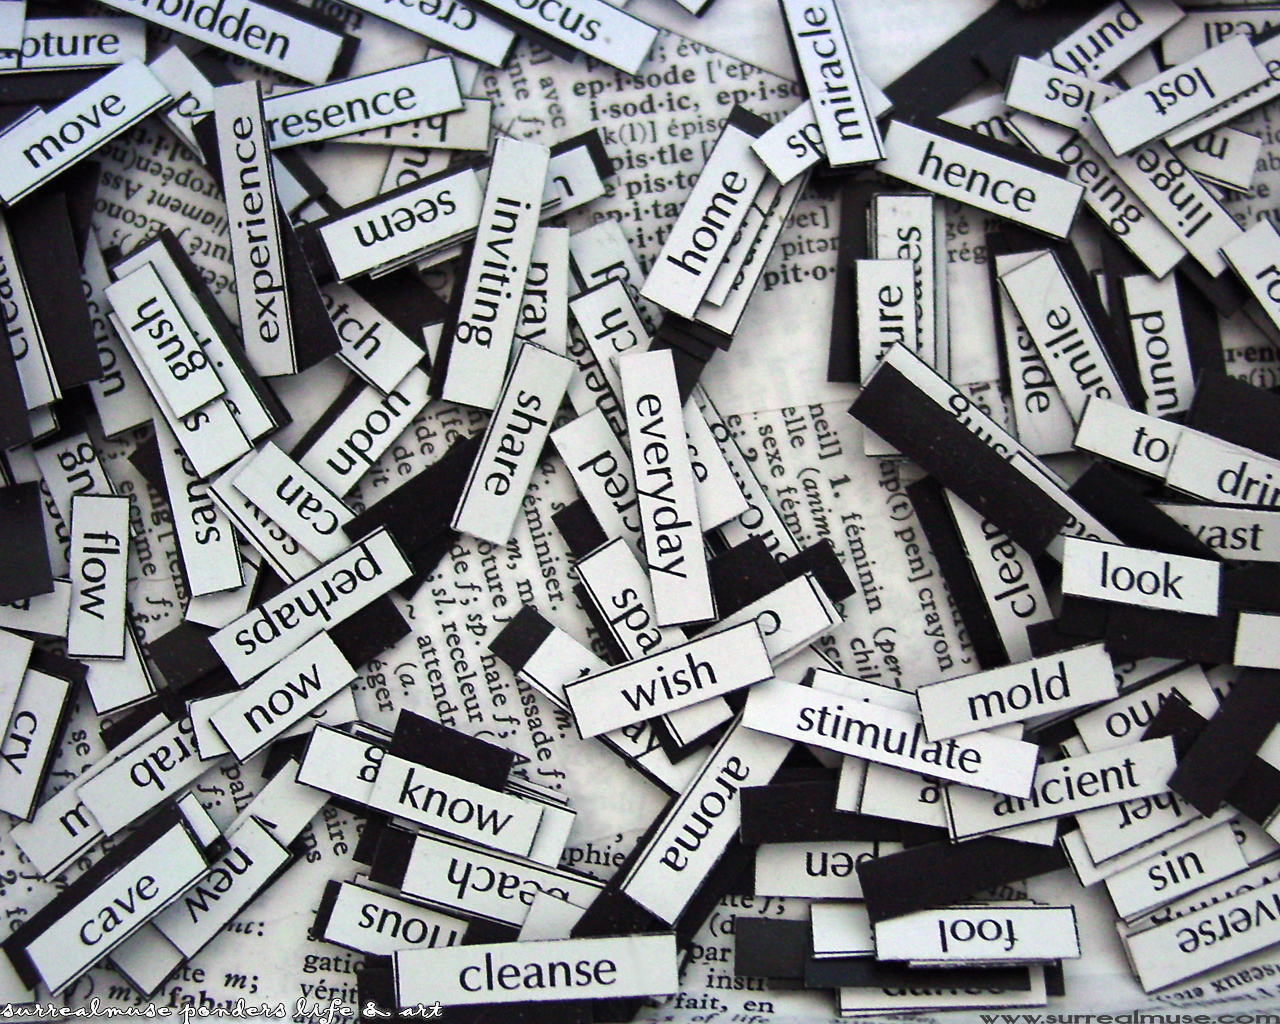 Black and white image of a pile of word fridge-magnets